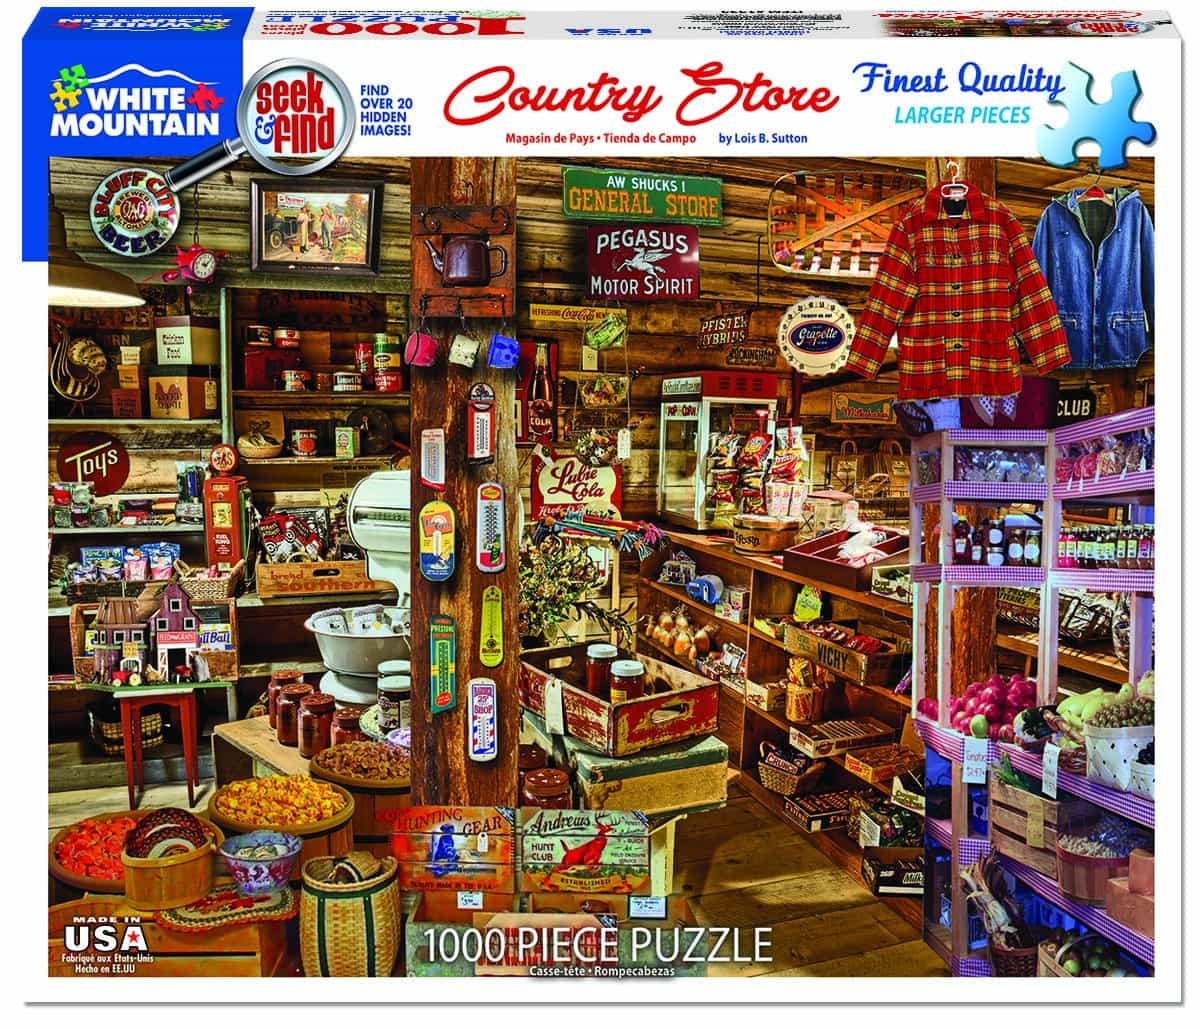 Country Store - Seek & Find (1393pz) - 1000 Piece Jigsaw Puzzles